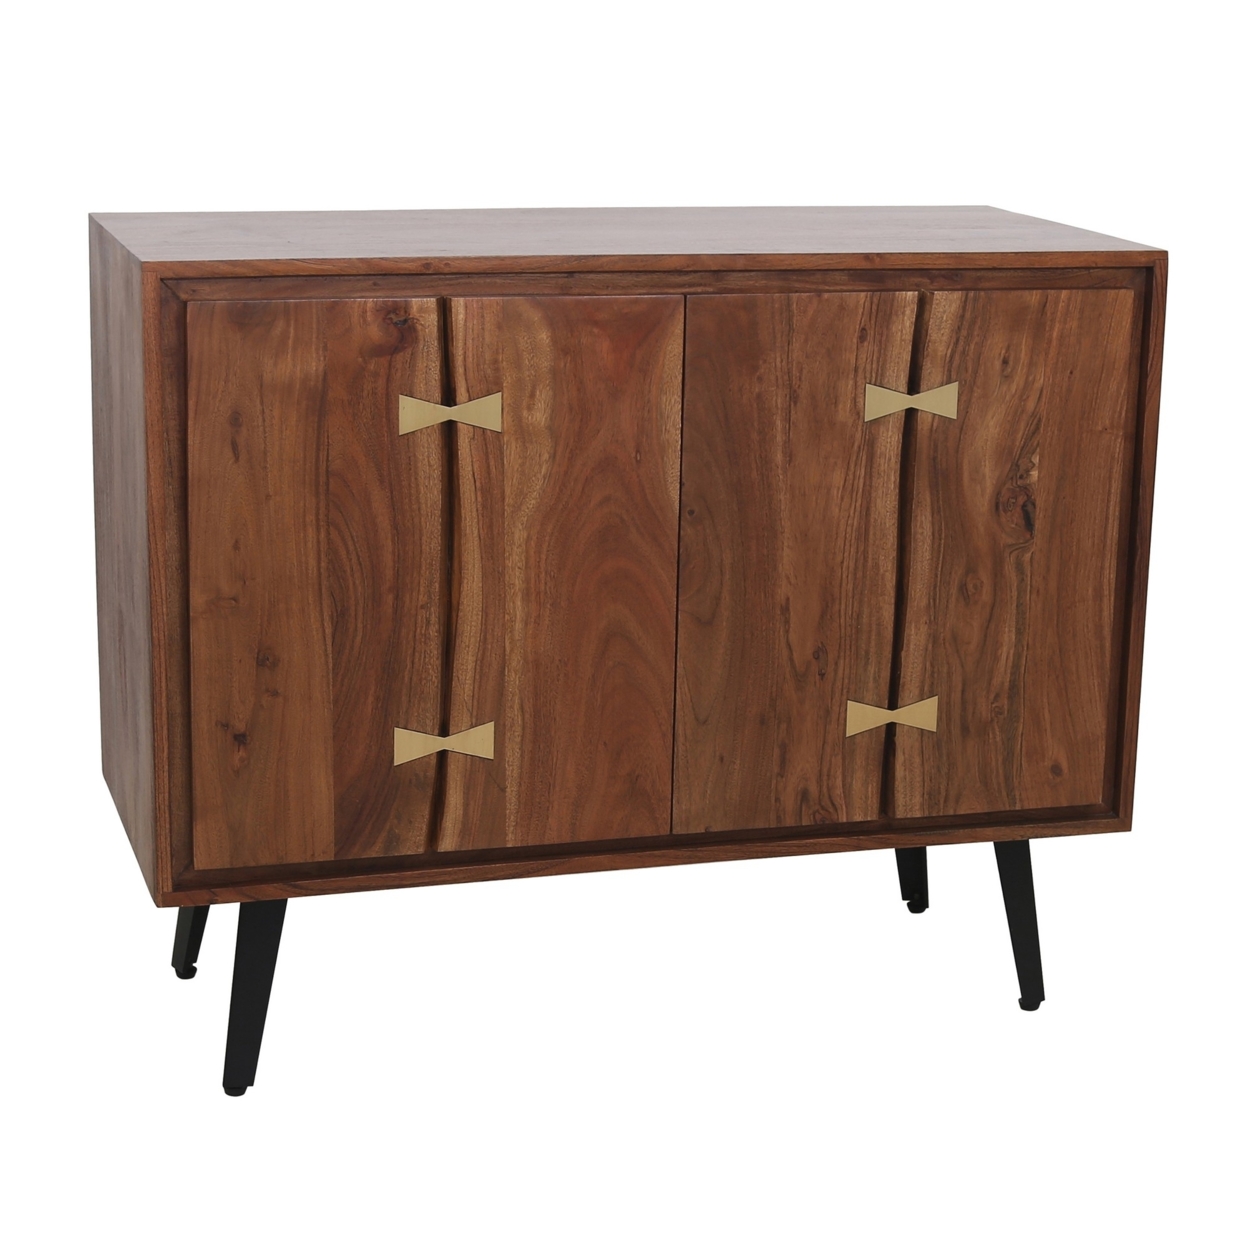 39 Inch Sideboard Cabinet Console Table, Double Doors, Gold Accents, Brown- Saltoro Sherpi